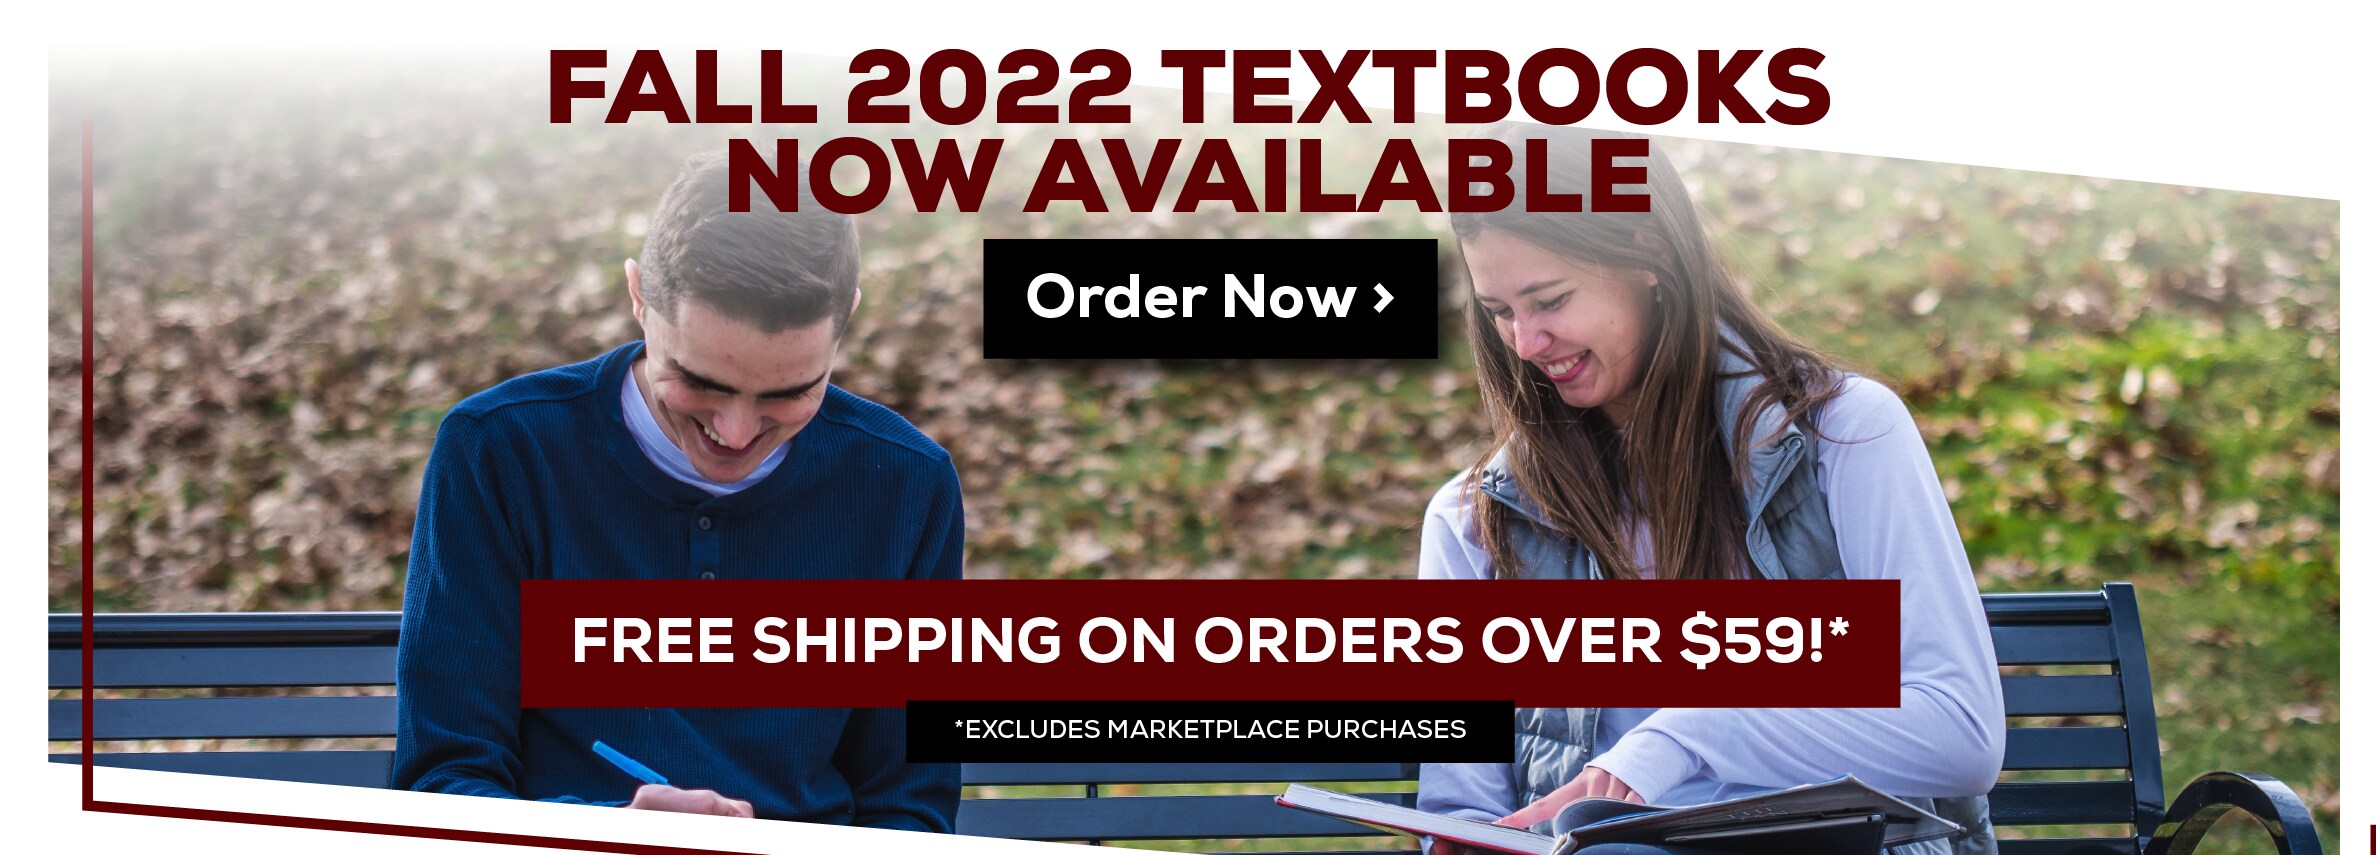 Fall 2022 Textbooks Now Available. Order Now. Free shipping on all orders over $59!* *Excludes marketplace purchases.